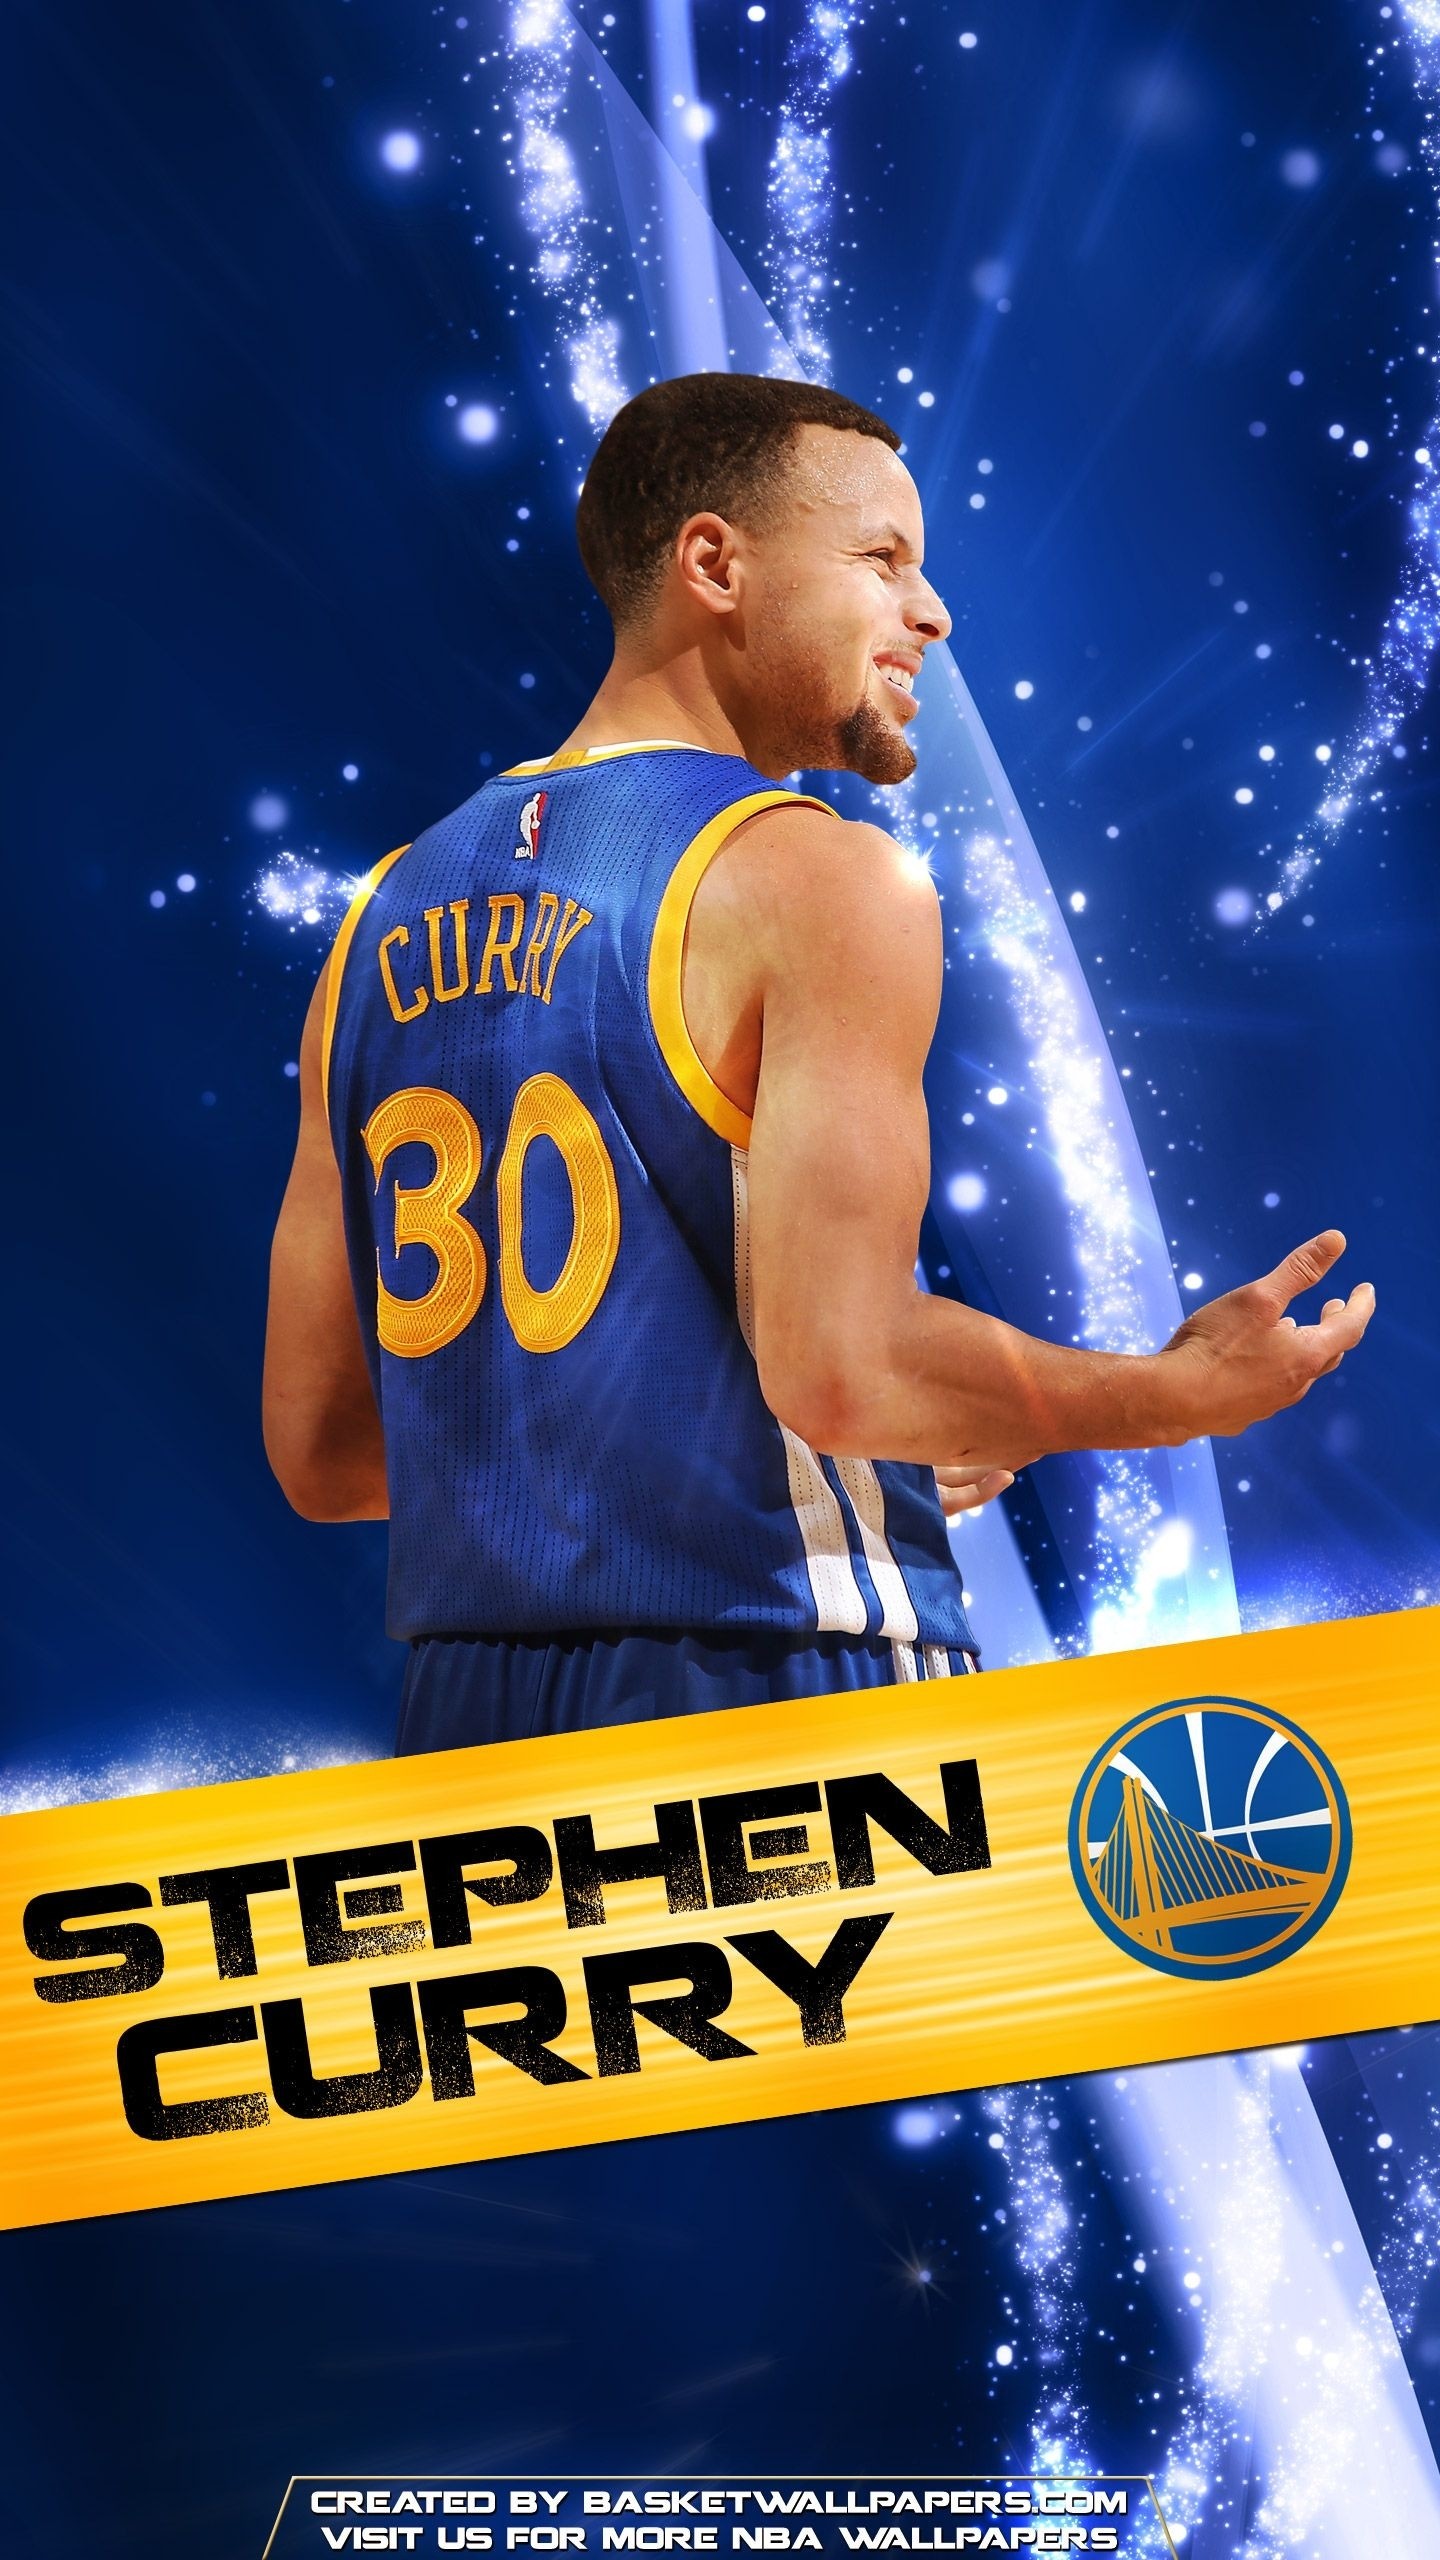 1440x2560 Title : stephen curry wallpaper for iphone – 2018 wallpapers hd | stephen.  Dimension : 1440 x 2560. File Type : JPG/JPEG